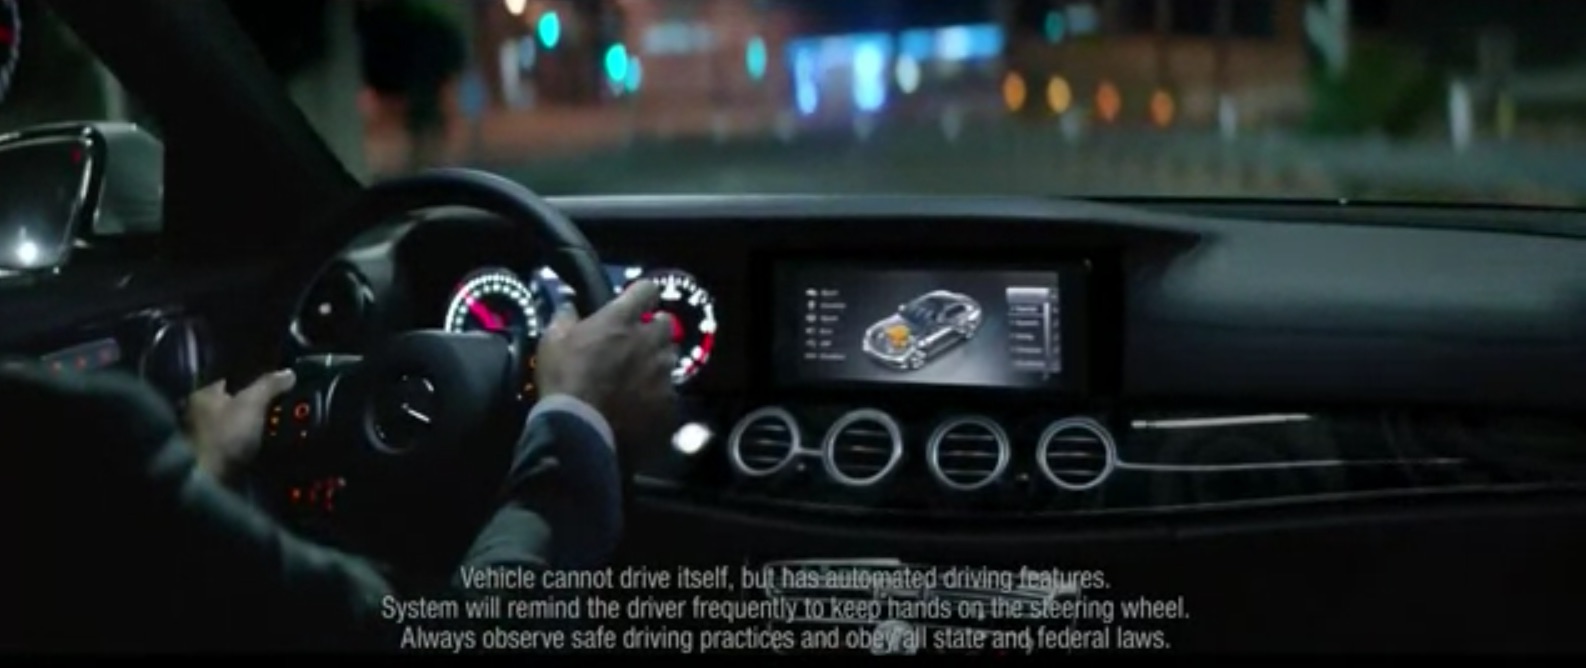 Mercedes Pulls Potentially Confusing Ads For 2017 E-Class That Call The Car ‘Self-Driving’